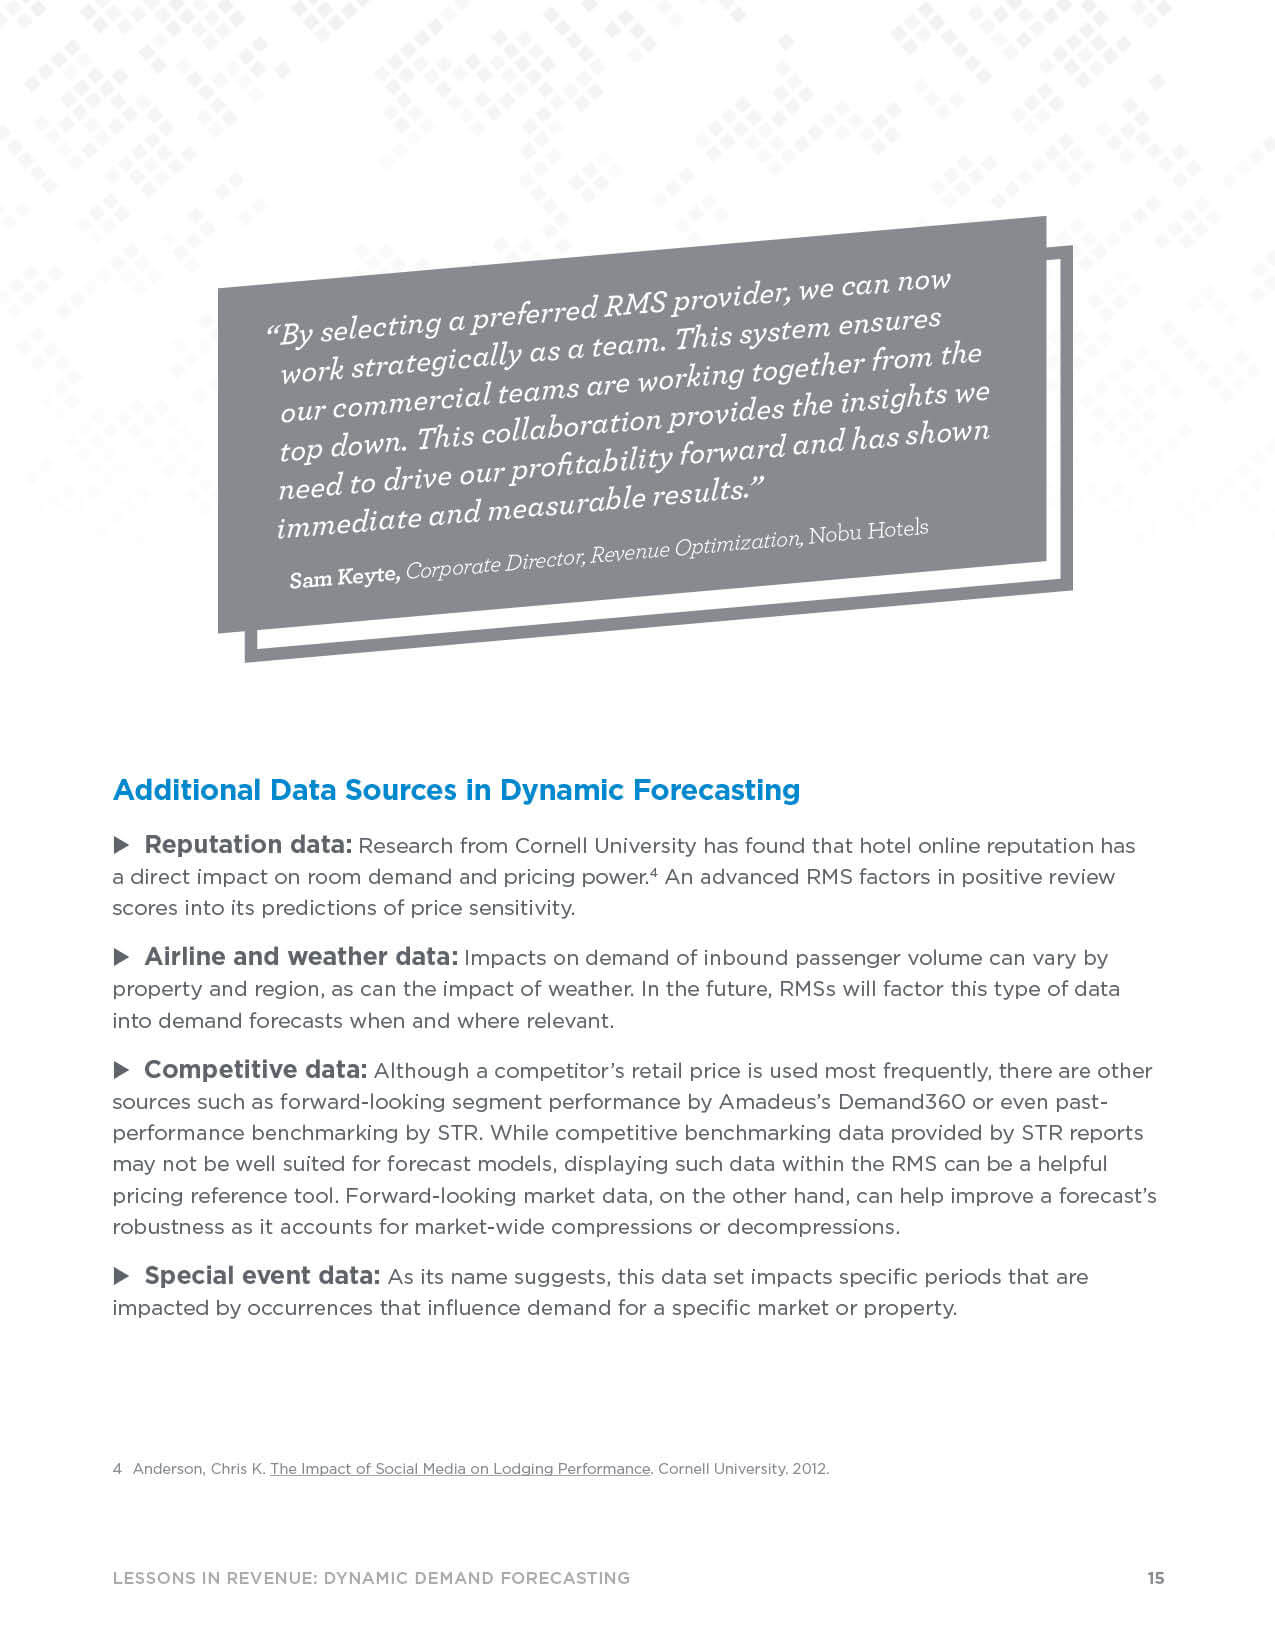 Page 15 - Additional Data Sources in Dynamic Forecasting